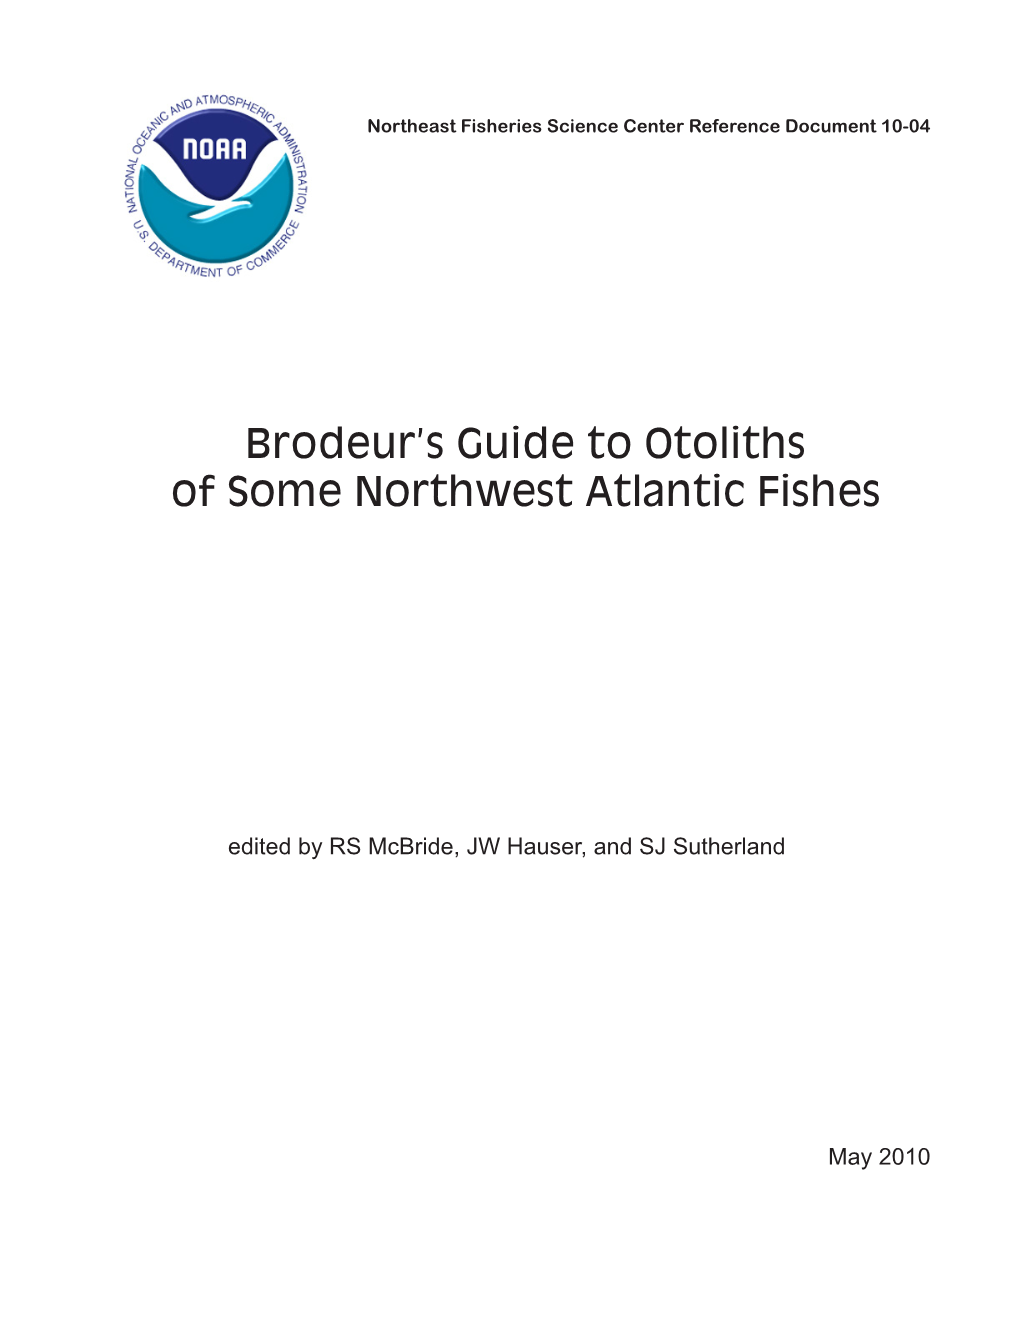 Brodeur's Guide to Otoliths of Some Northwest Atlantic Fishes